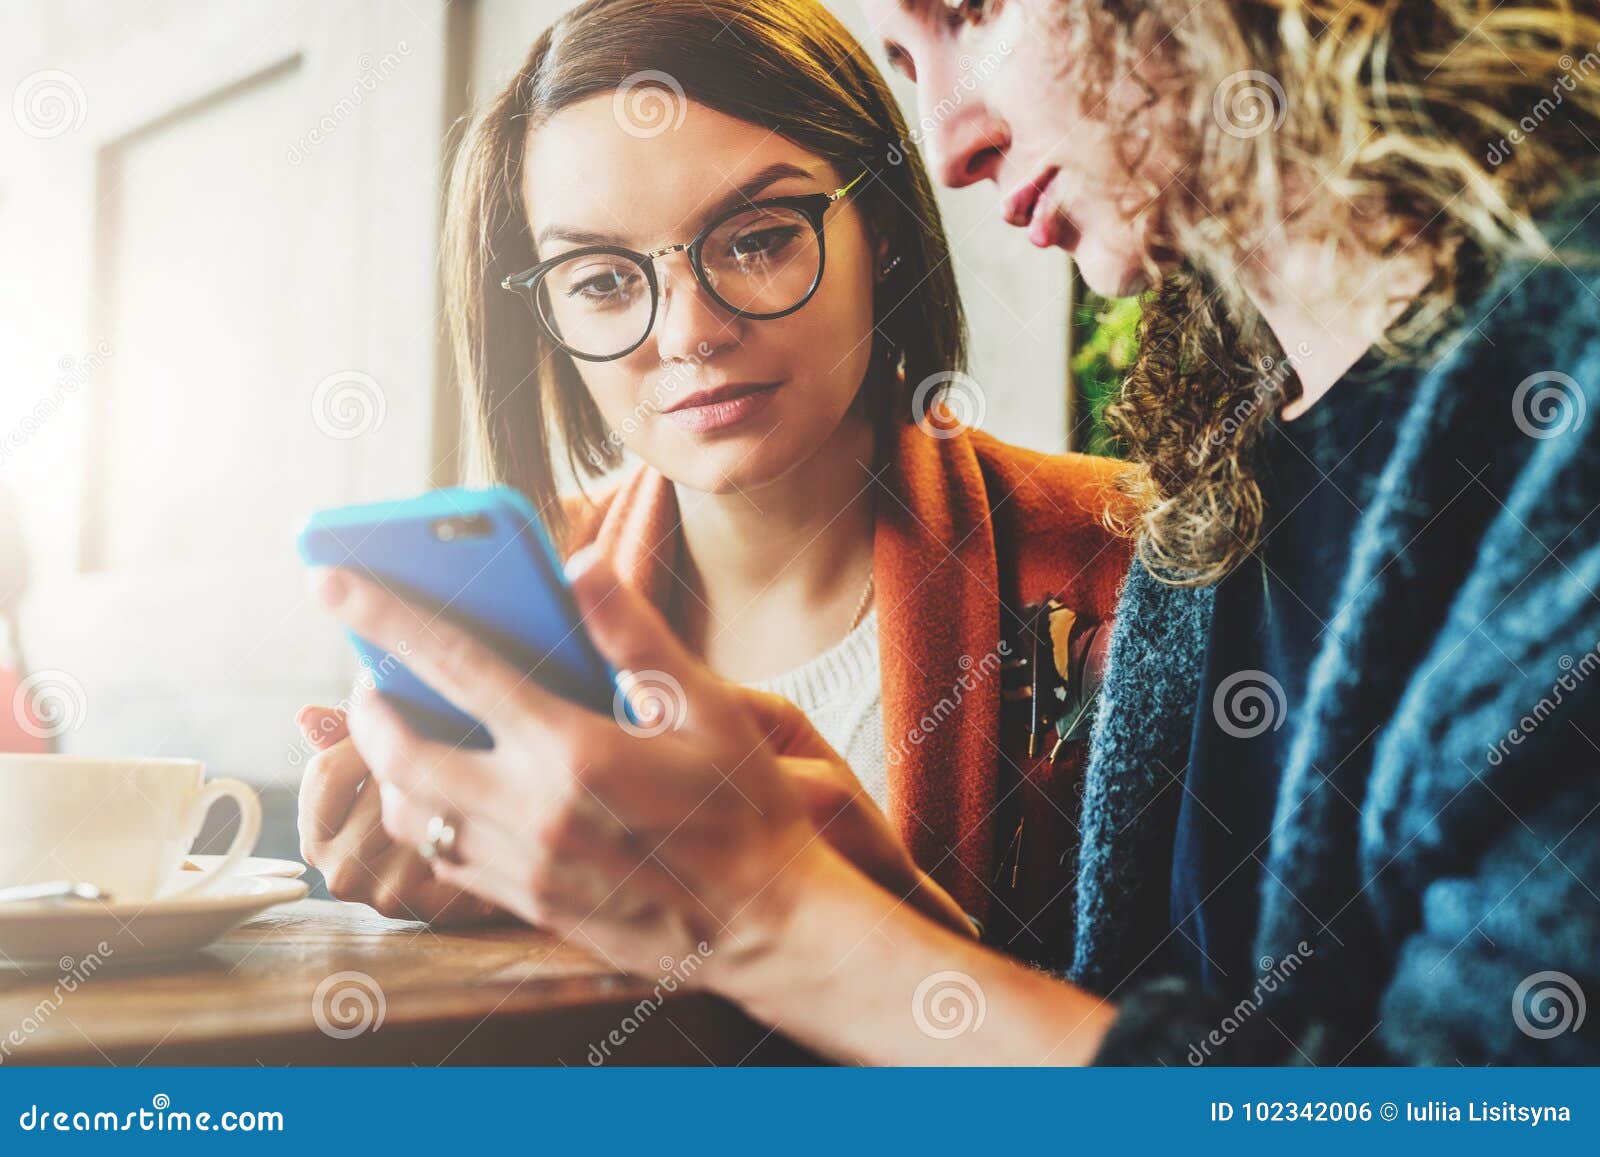 two young women sit in a cafe at the table and use a smartphone. the girl shows her friend a picture on the phone screen